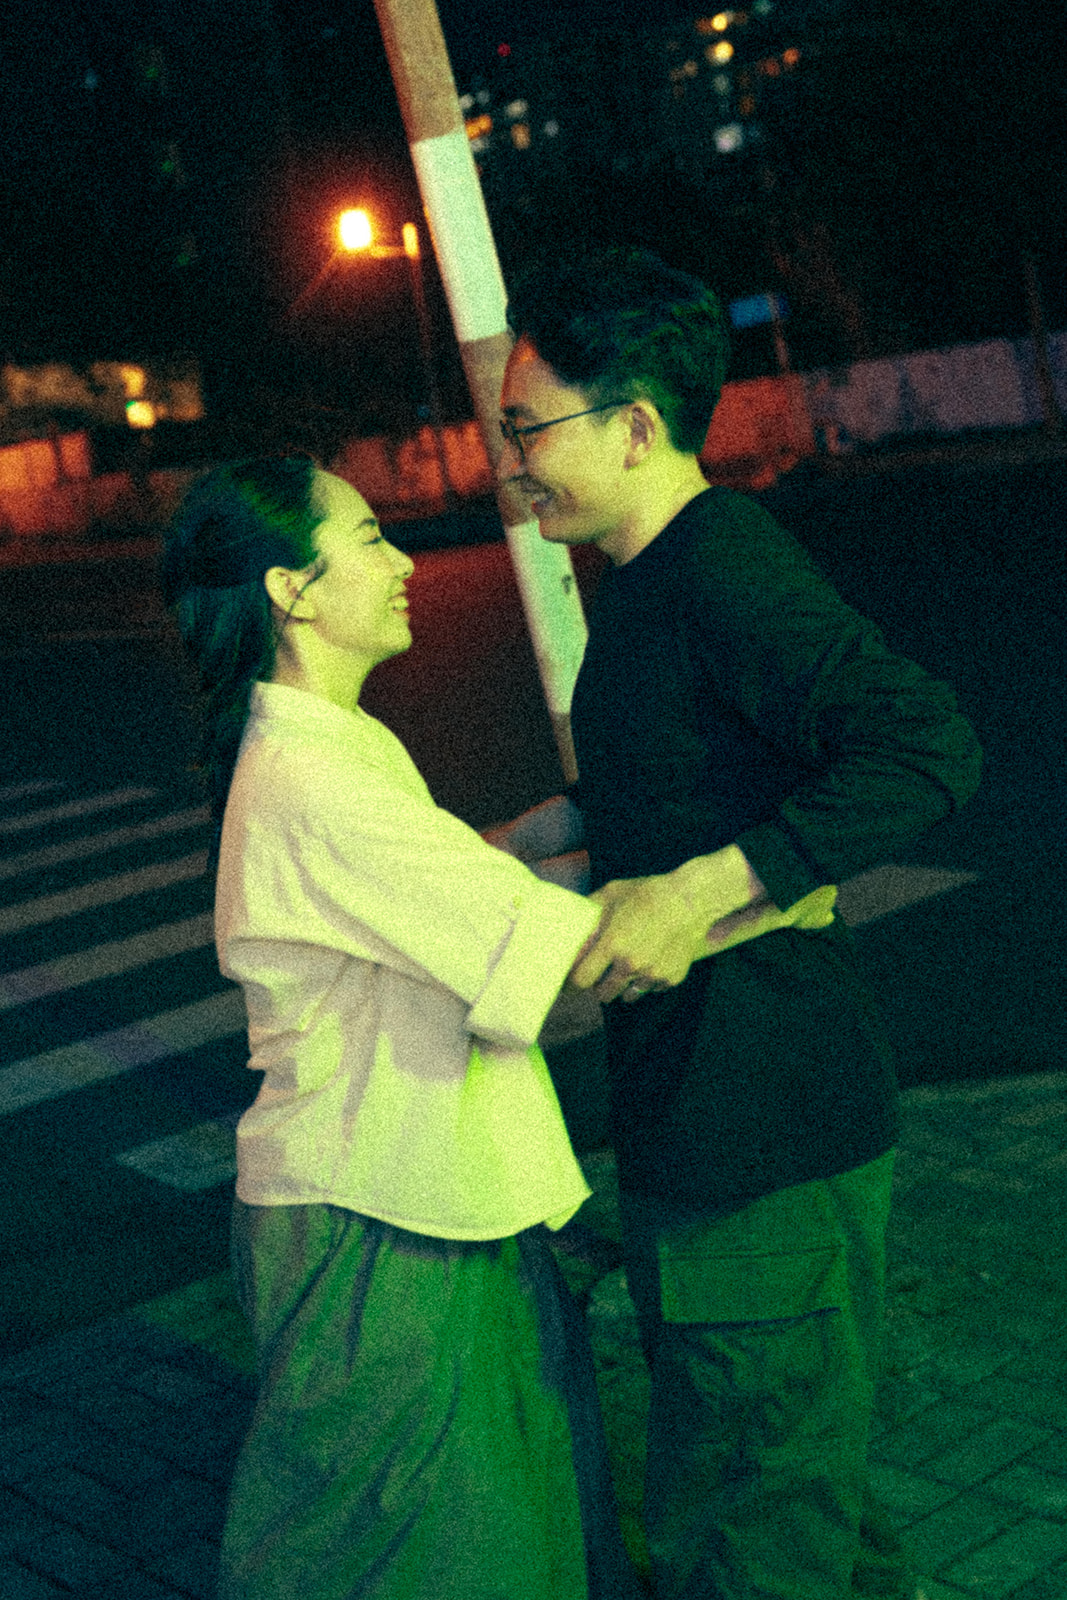 Casual authentic happy night time Pre-wedding photography in Saigon